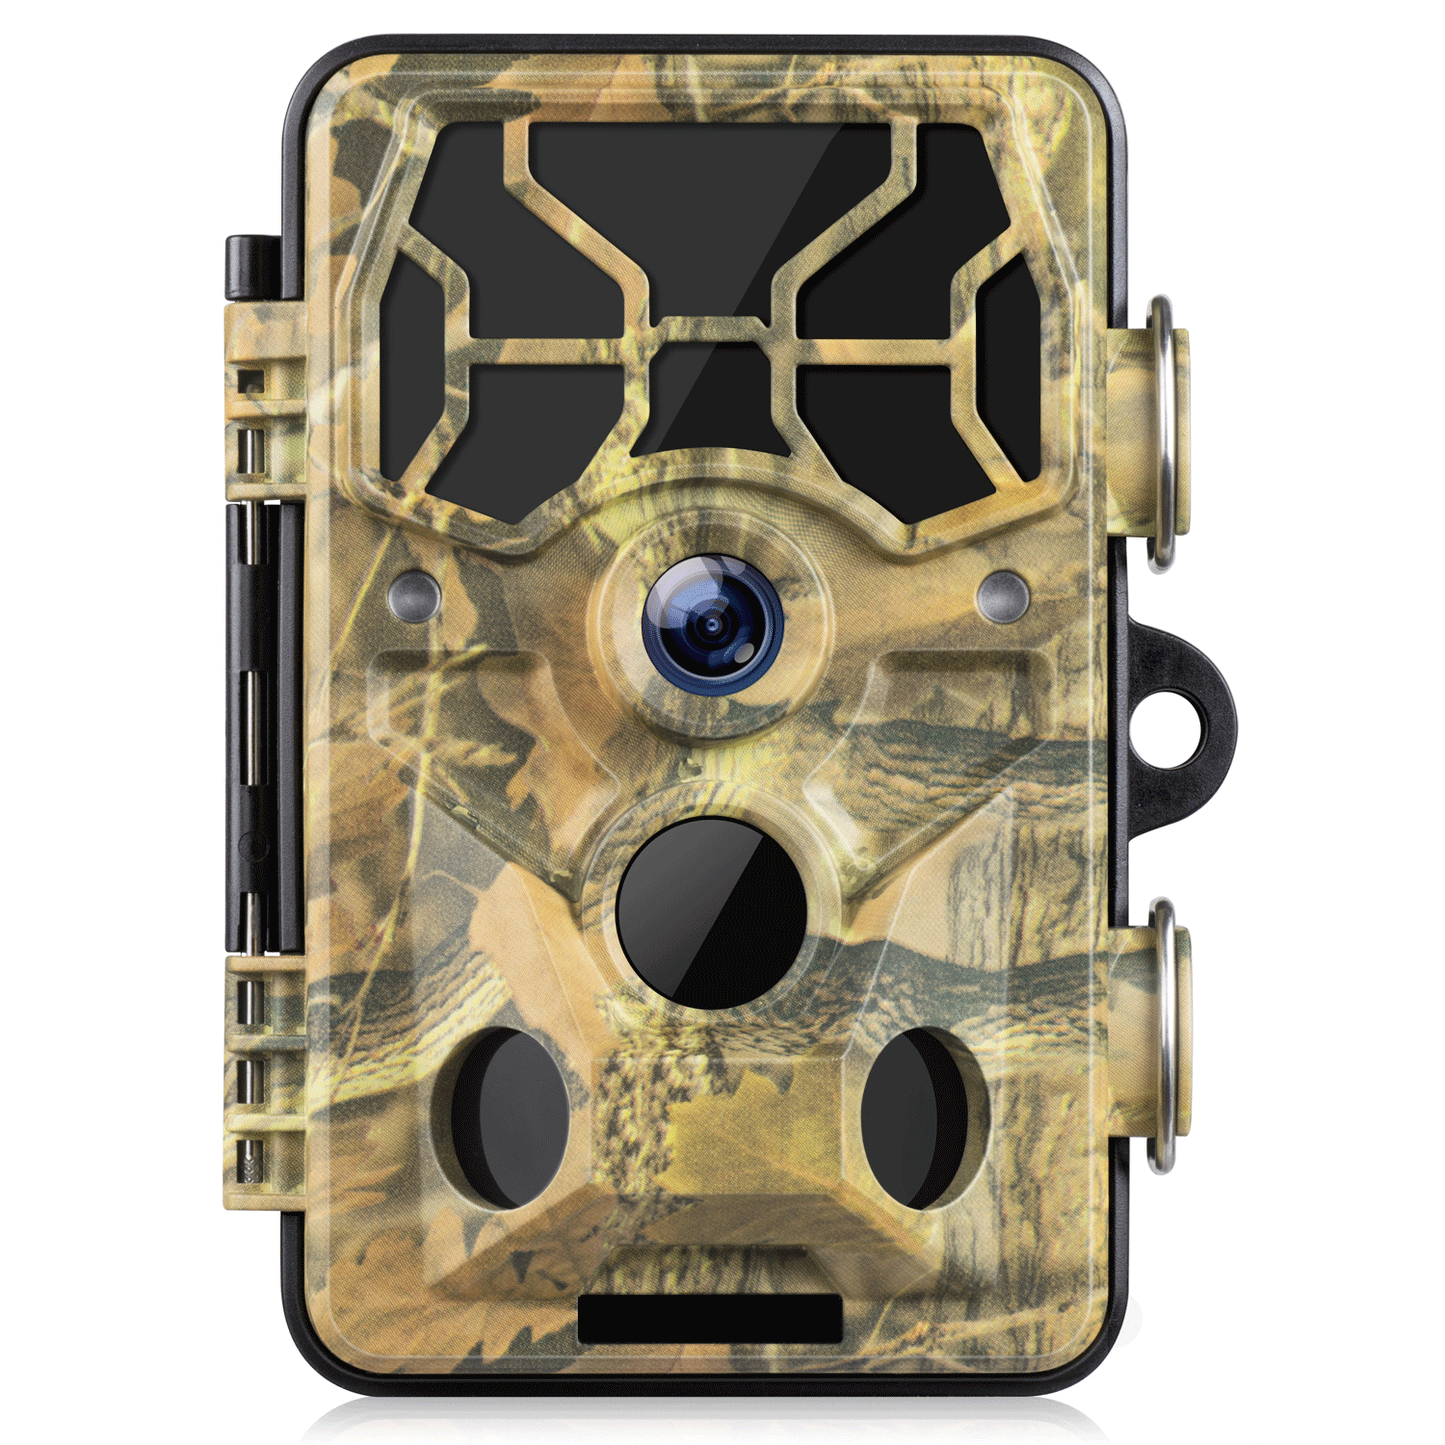 CAMPARK WiFi Trail Camera 20MP 1296P Hunting Game Camera Bluetooth 120° Motion Activated IP66 Waterproof with 850nm Night Vision Trail Cam for Wildlife Monitoring